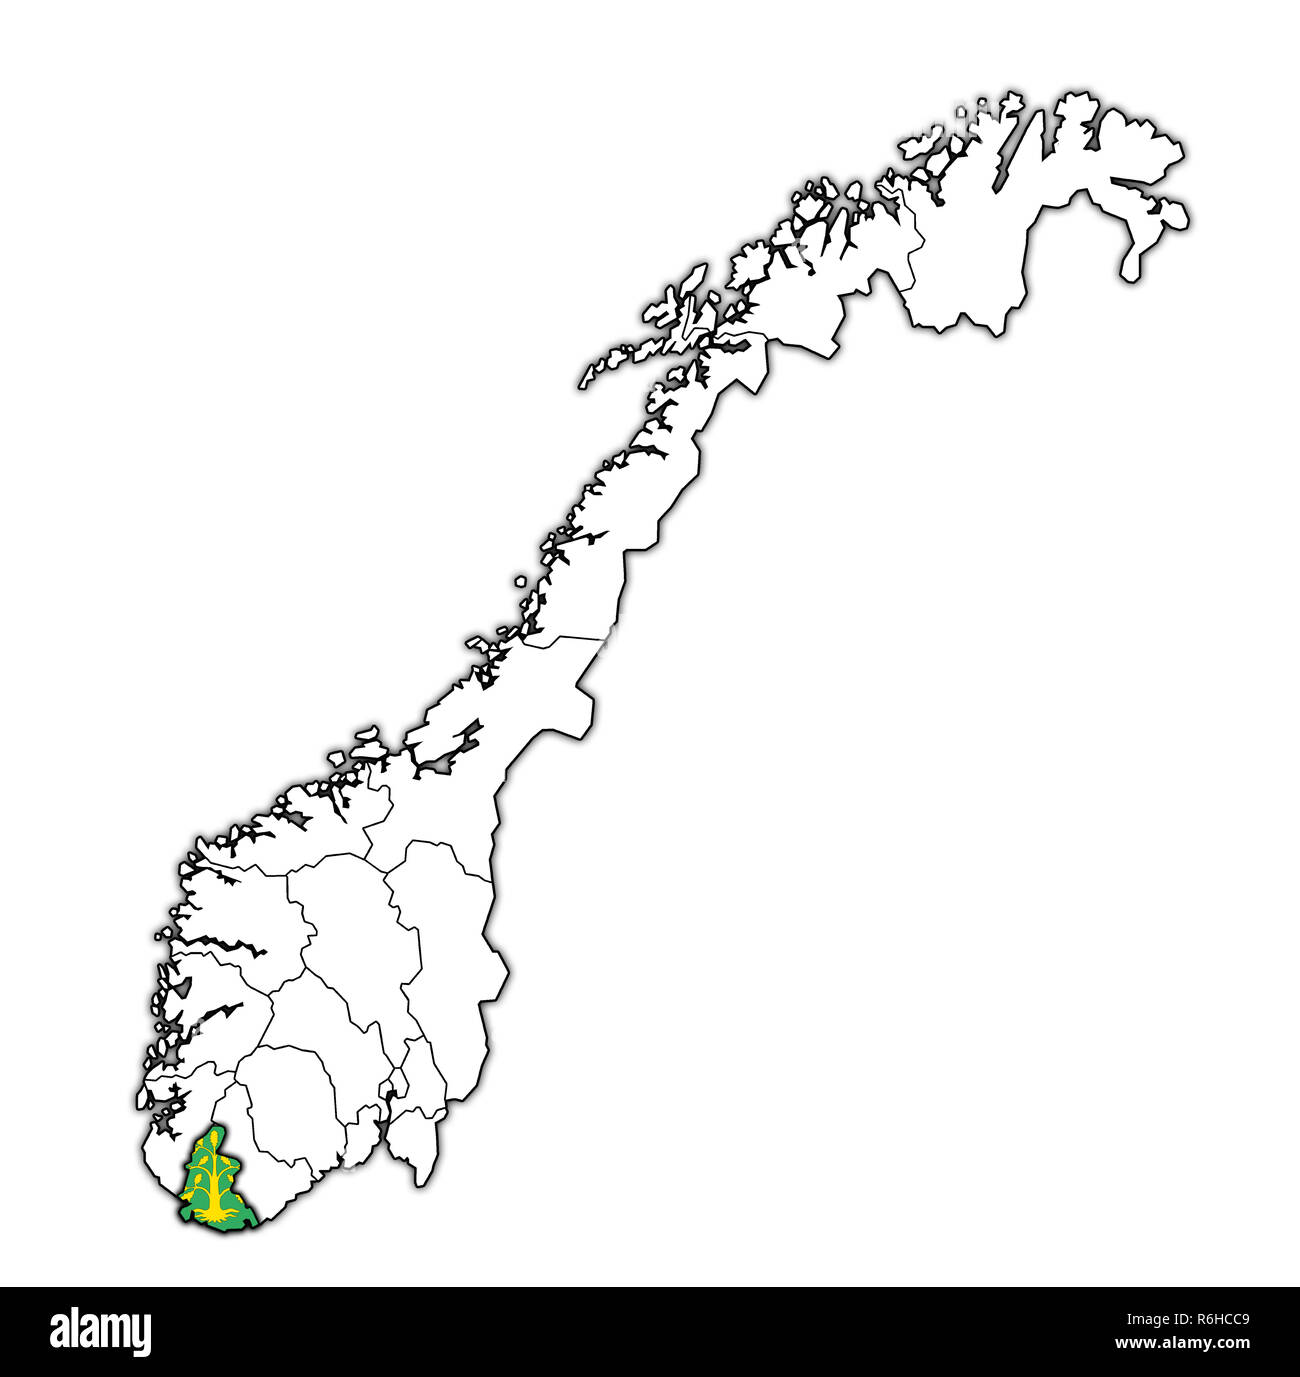 West Agder region on administration map of norway Stock Photo